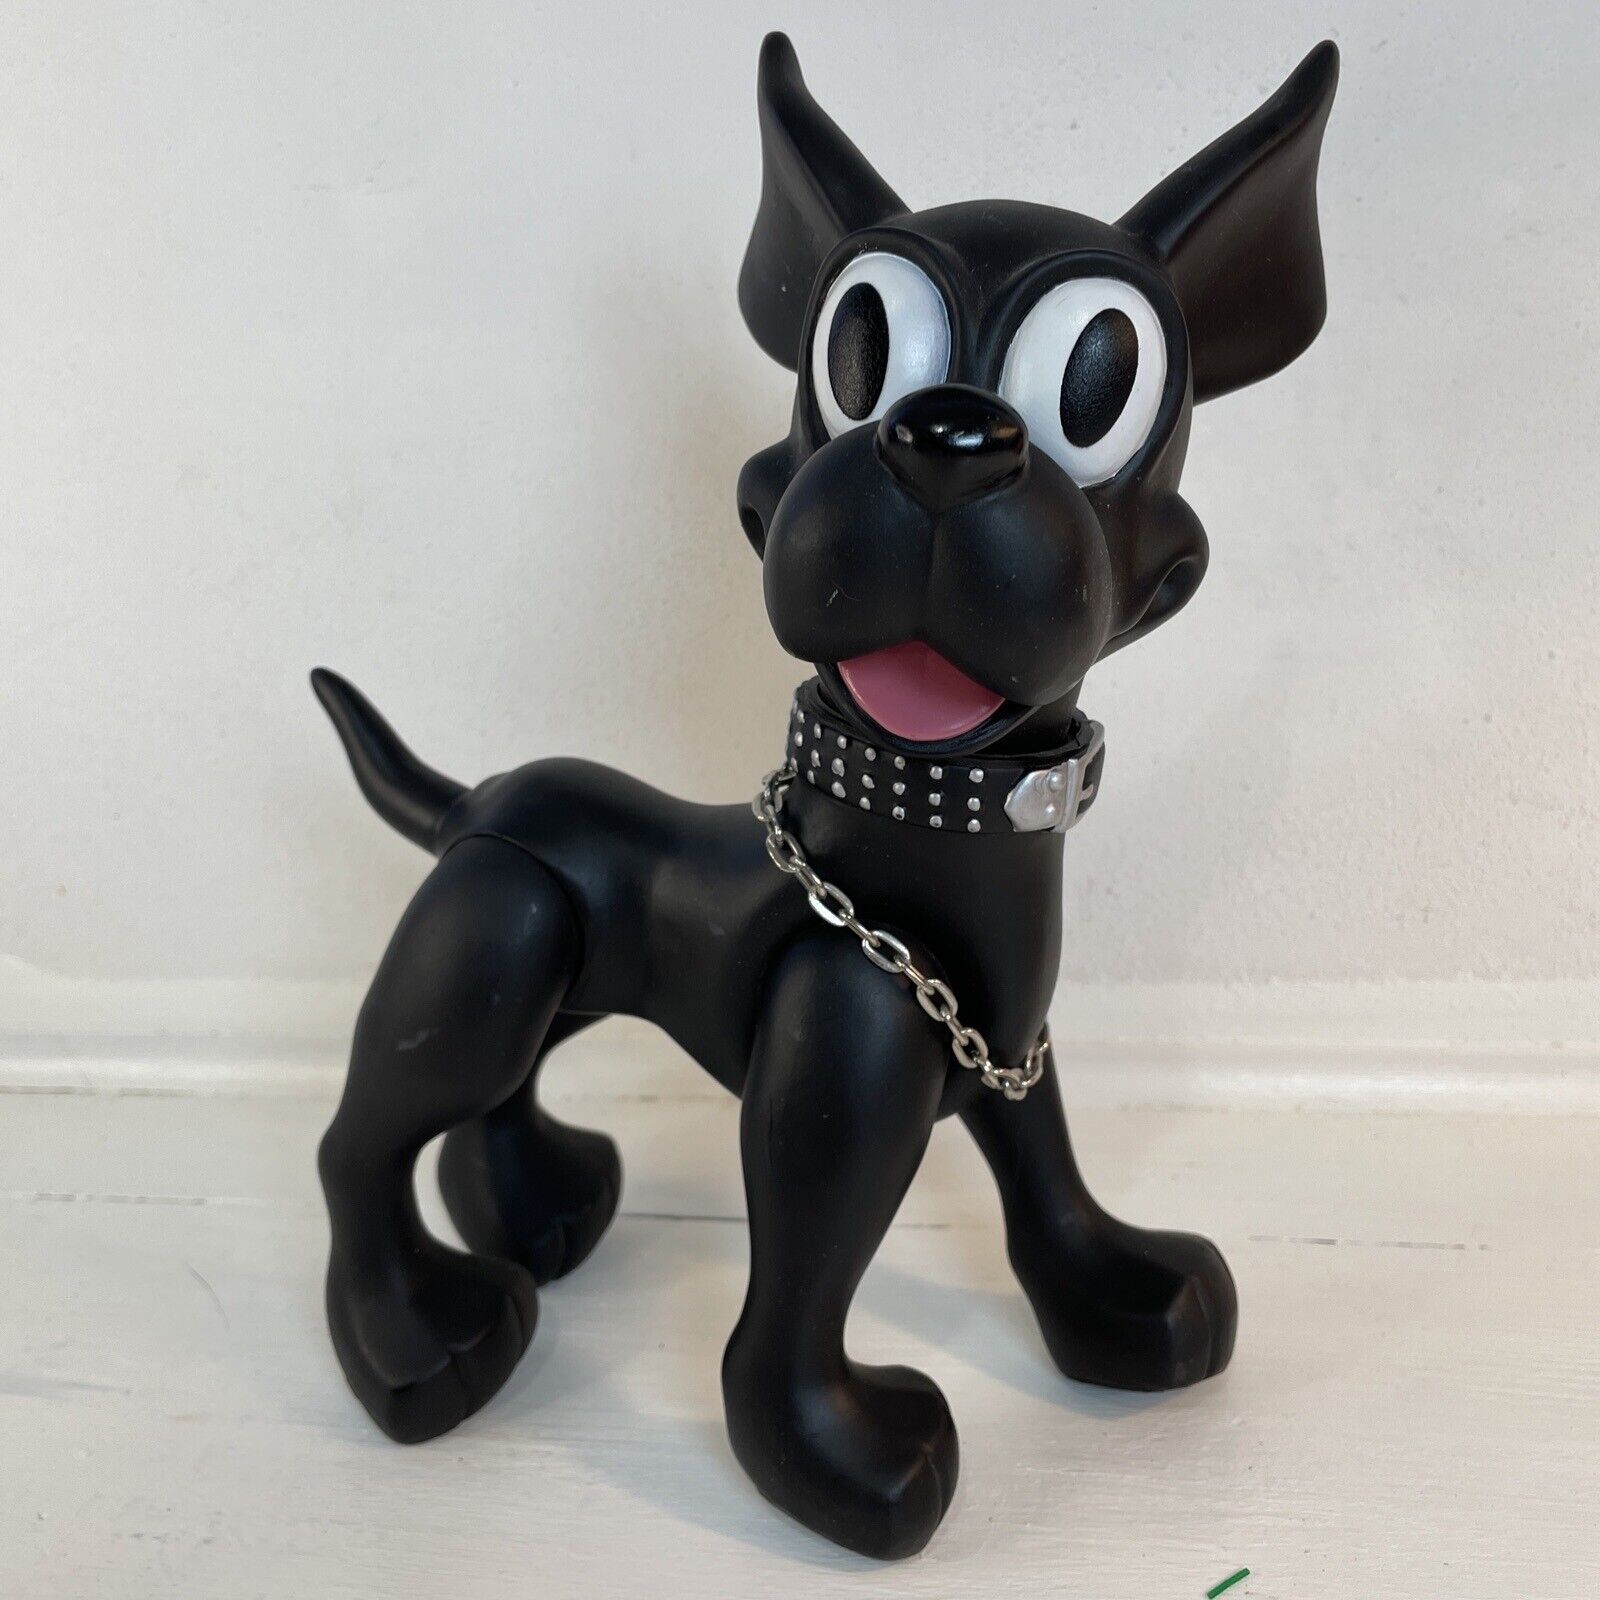 Black Toy Dog 9” Hard Plastic Unmarked Articulated